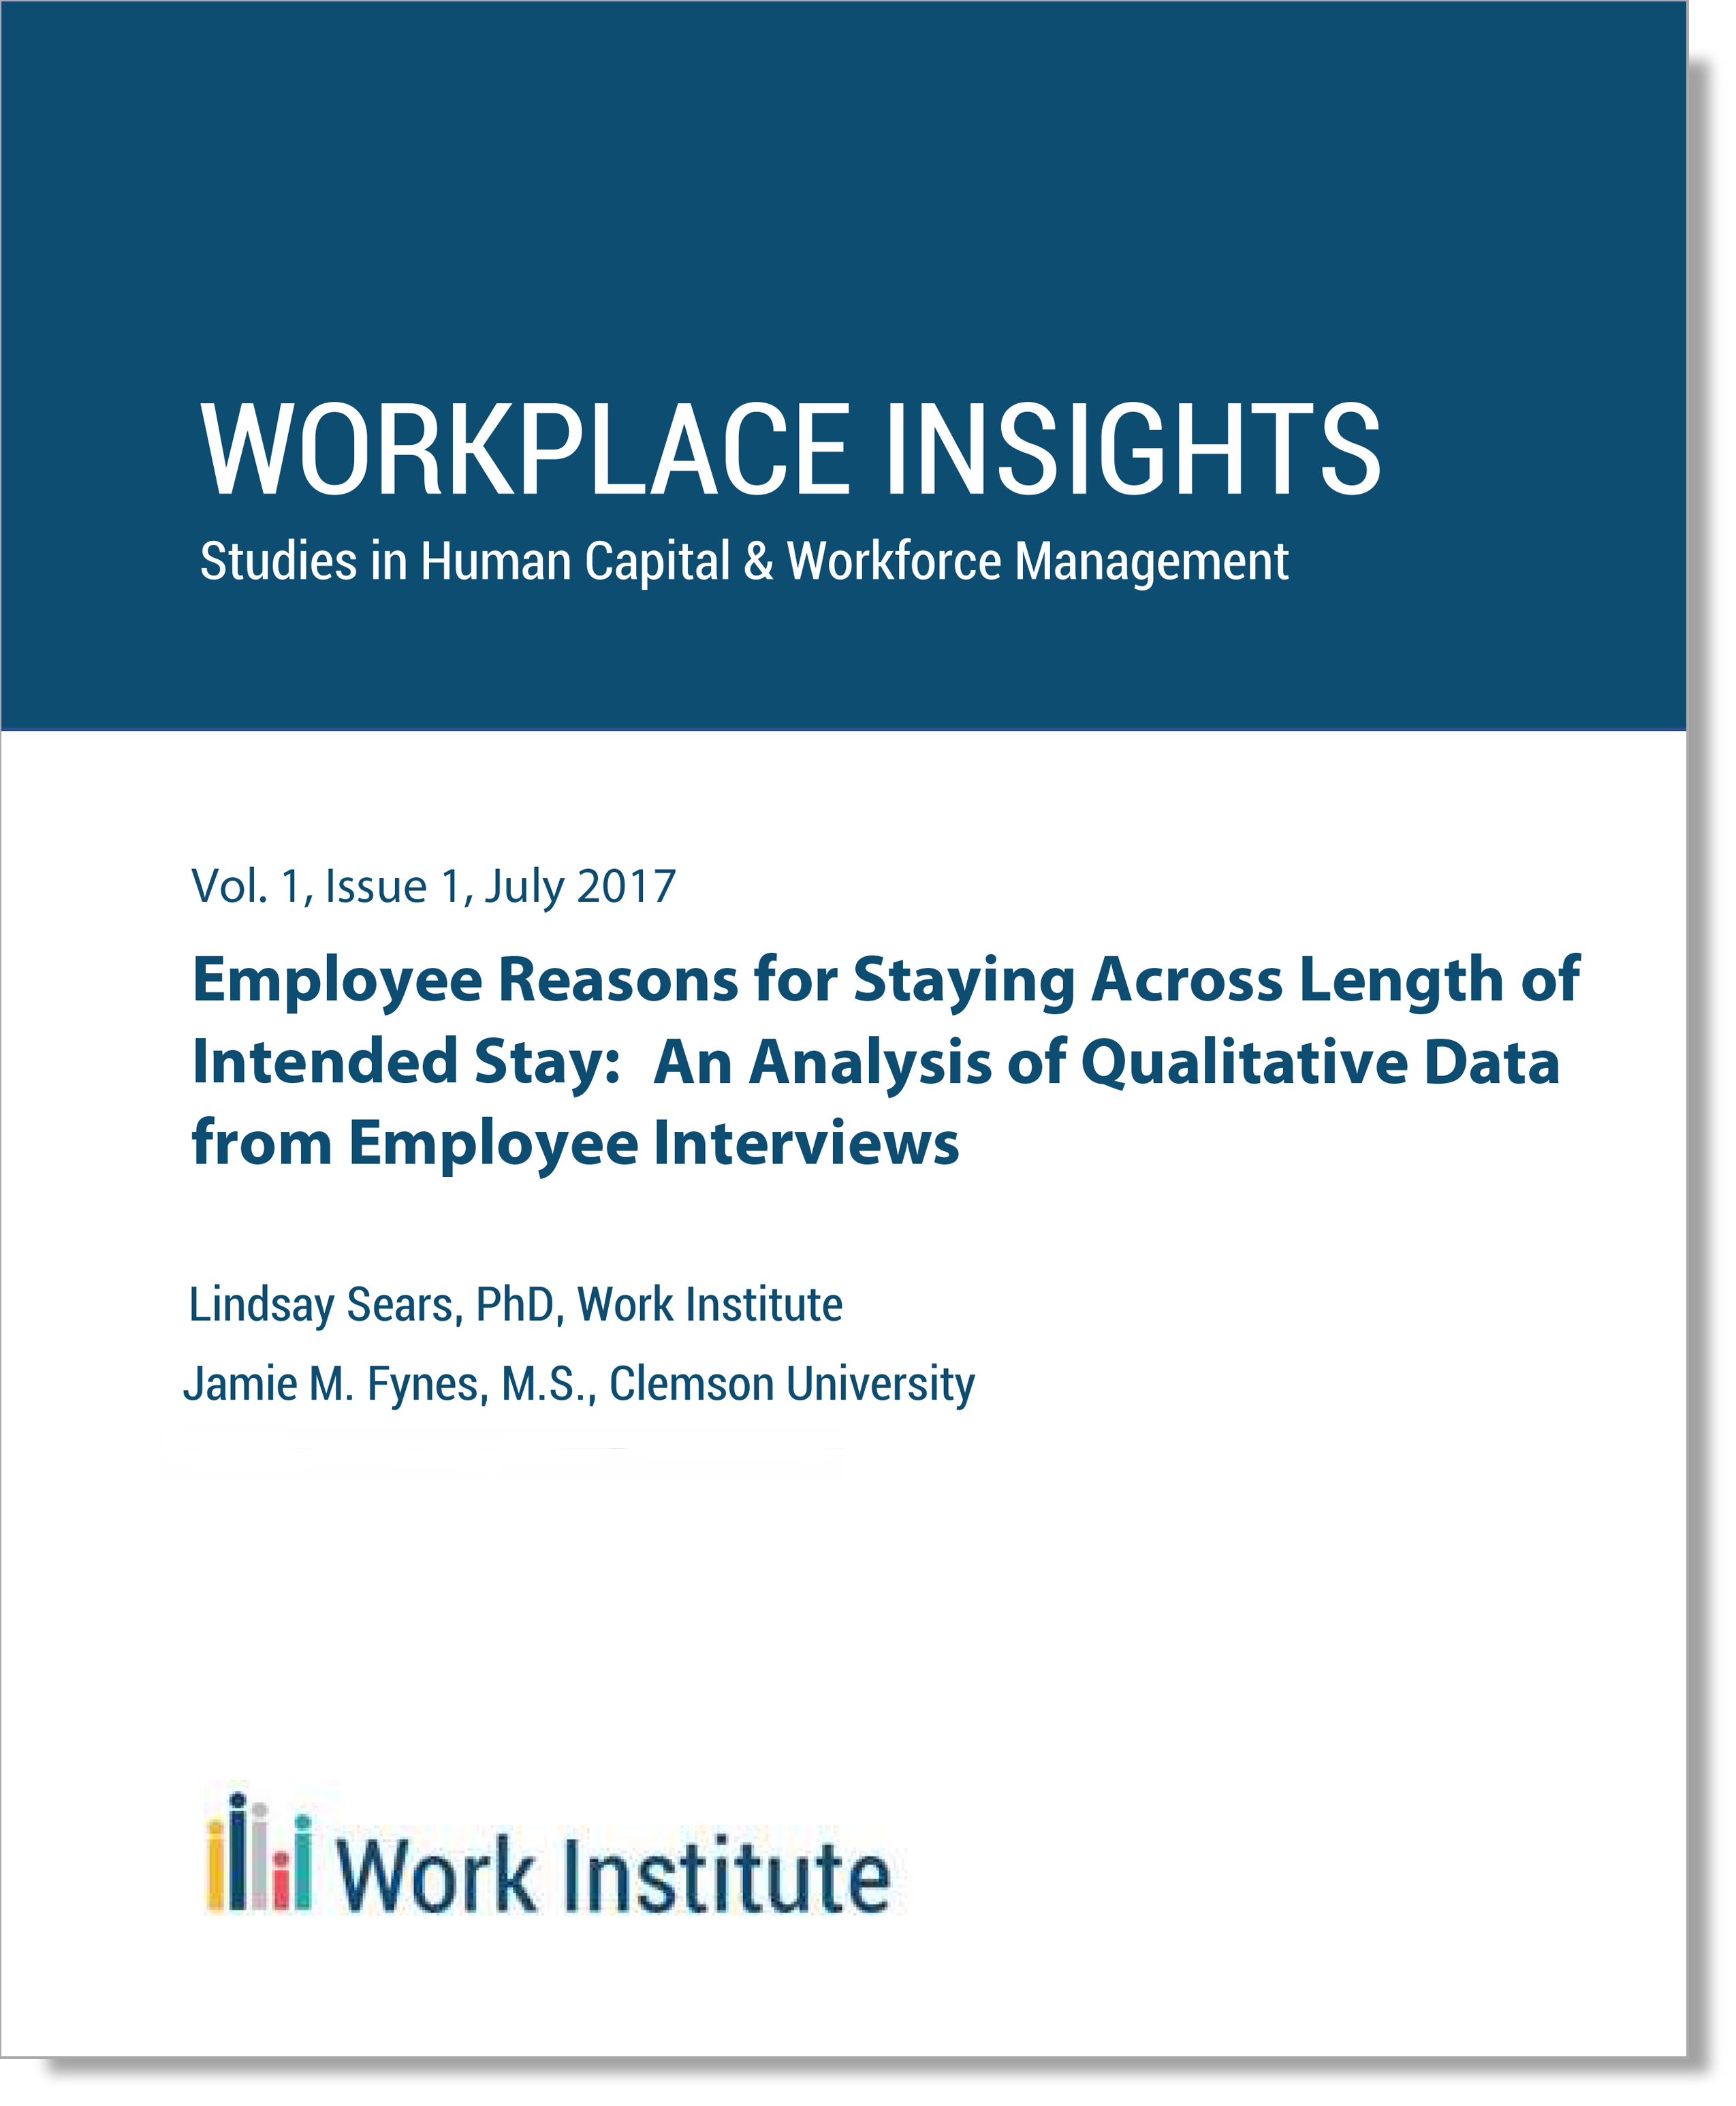 Workplace Insights-Vol01-Issue01-Reasons for Staying (Fynes&Sears)-2017-FINAL 7.21-1.png